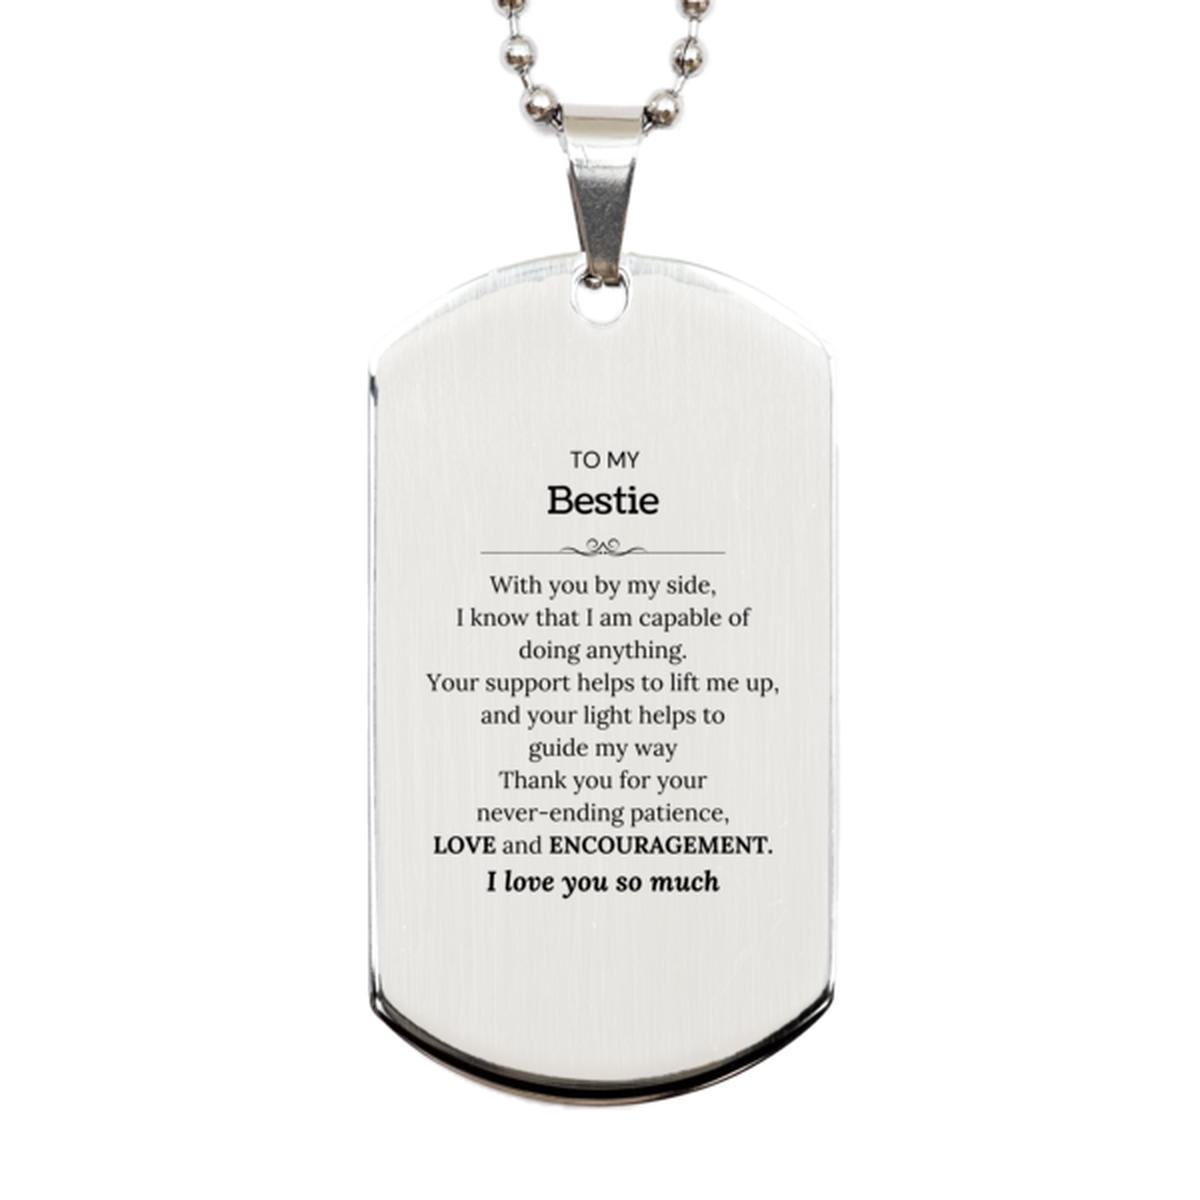 Appreciation Bestie Silver Dog Tag Gifts, To My Bestie Birthday Christmas Wedding Keepsake Gifts for Bestie With you by my side, I know that I am capable of doing anything. I love you so much